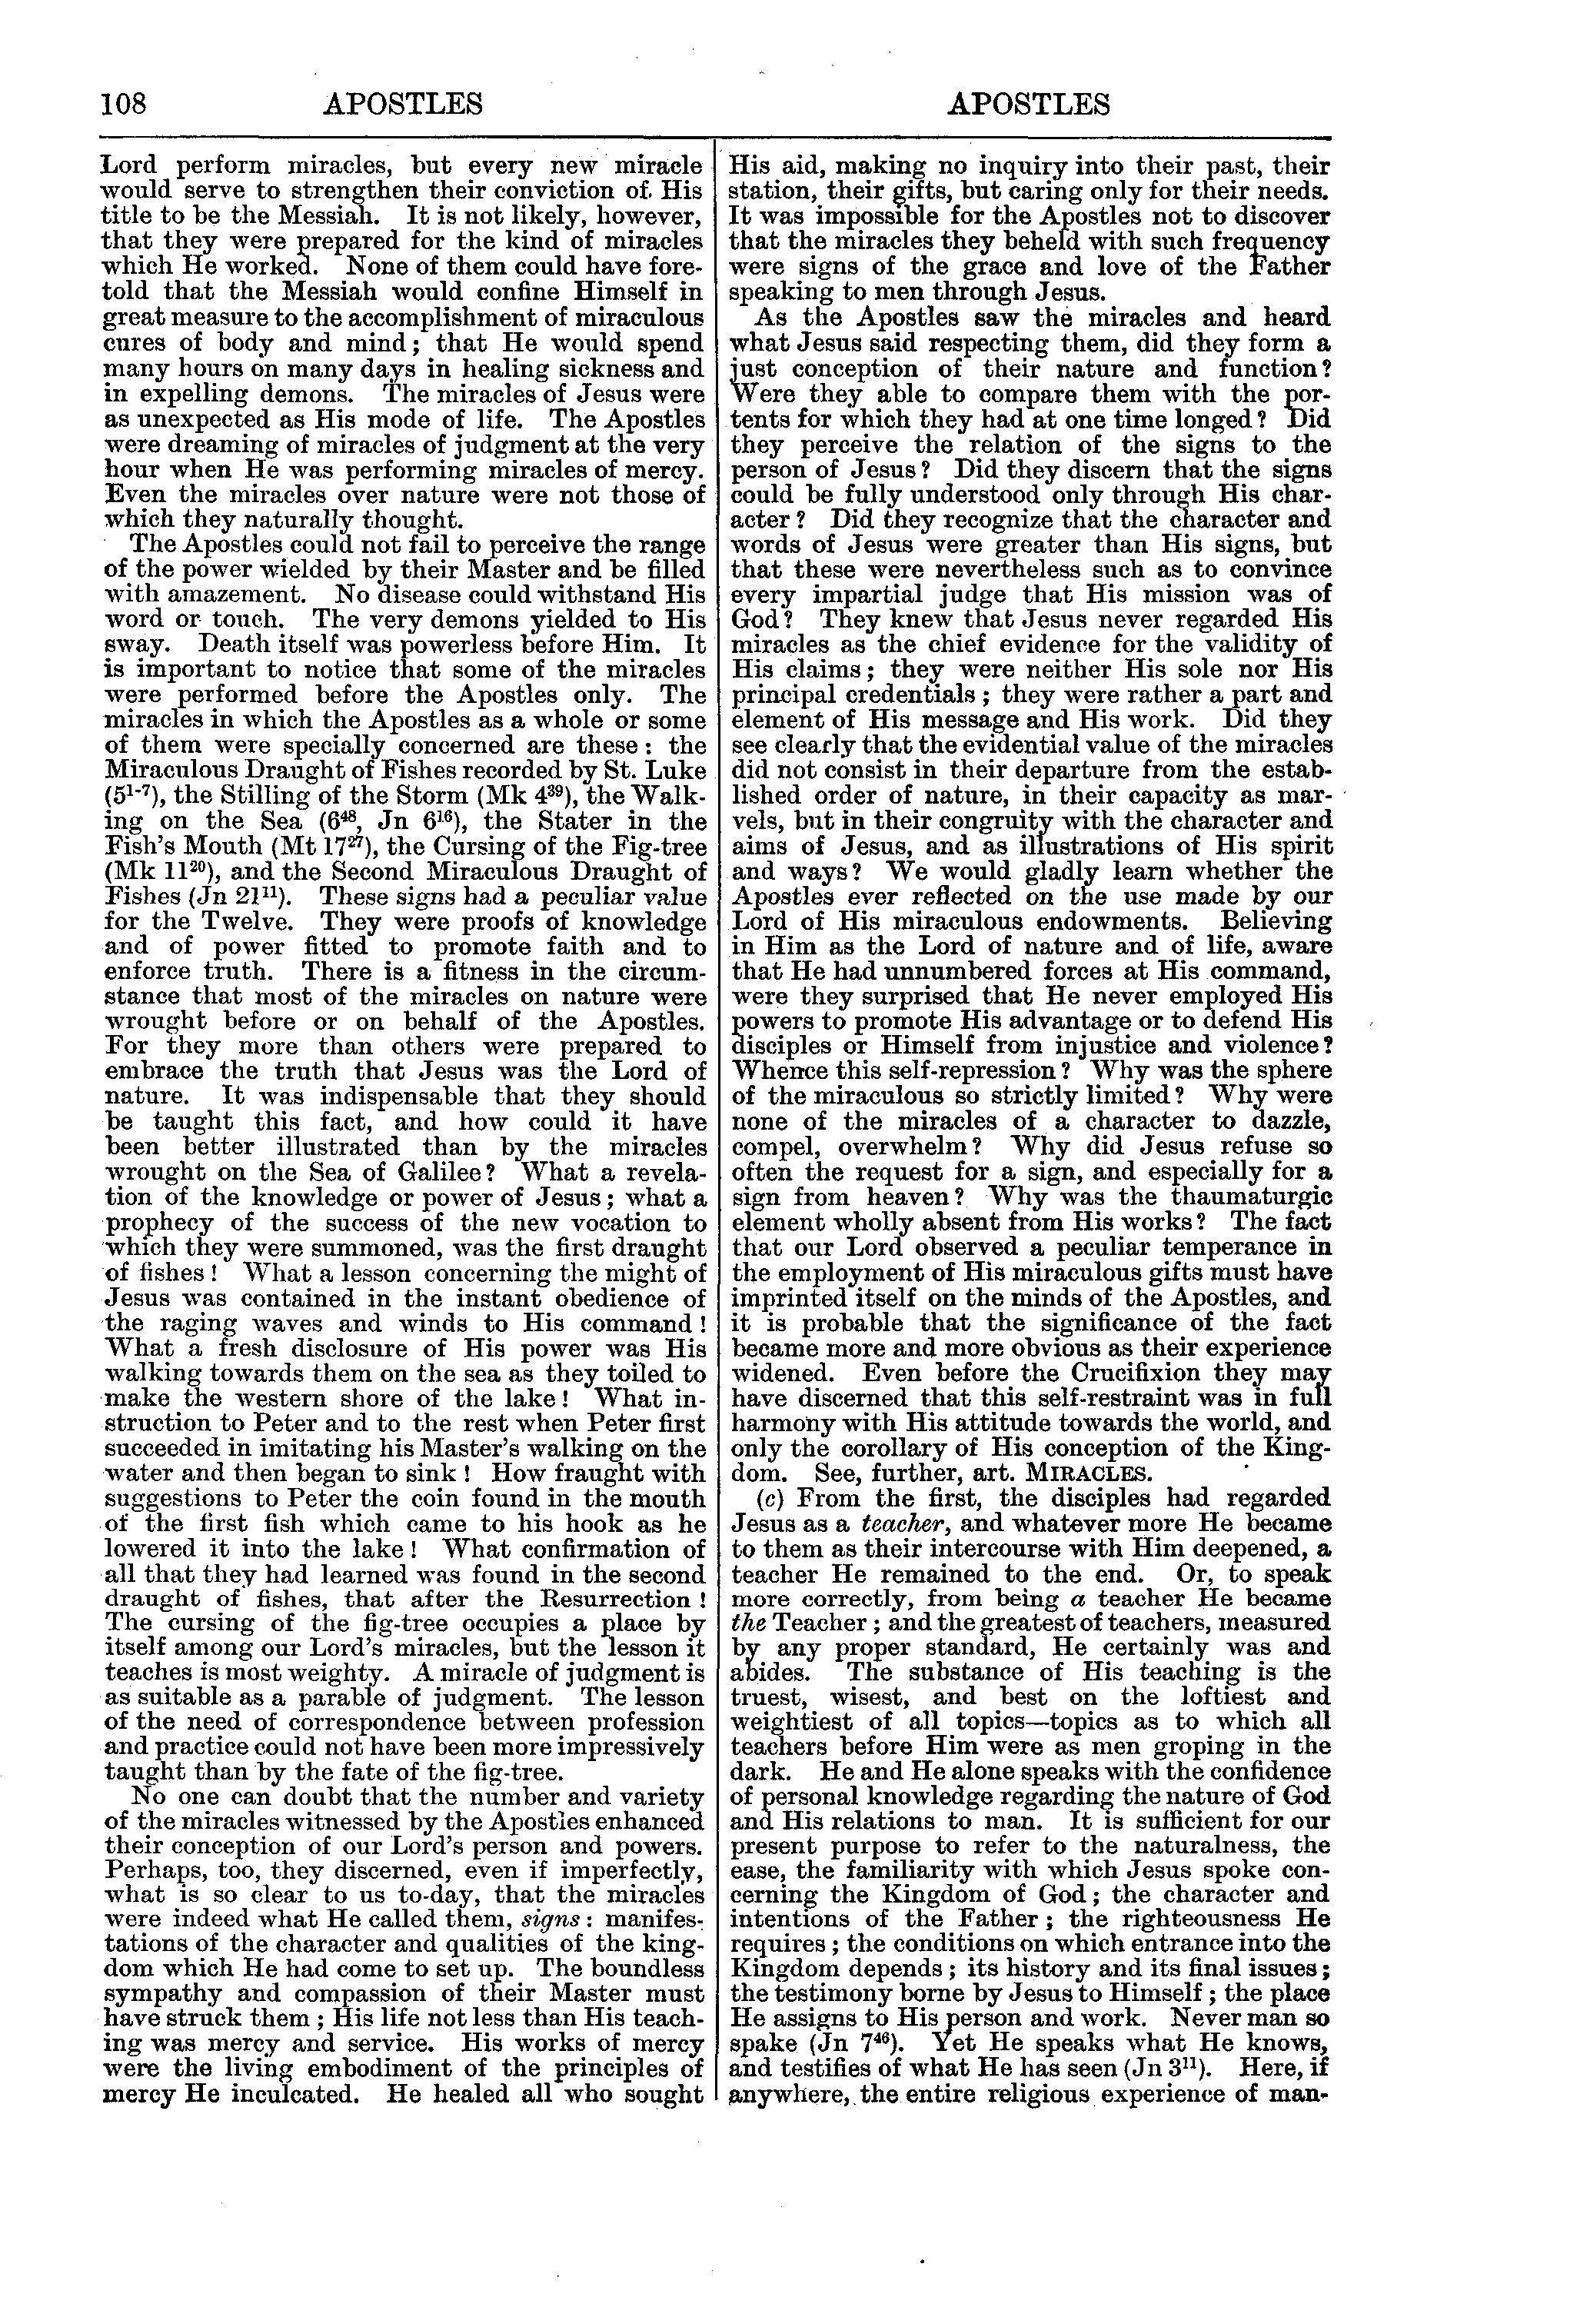 Image of page 108